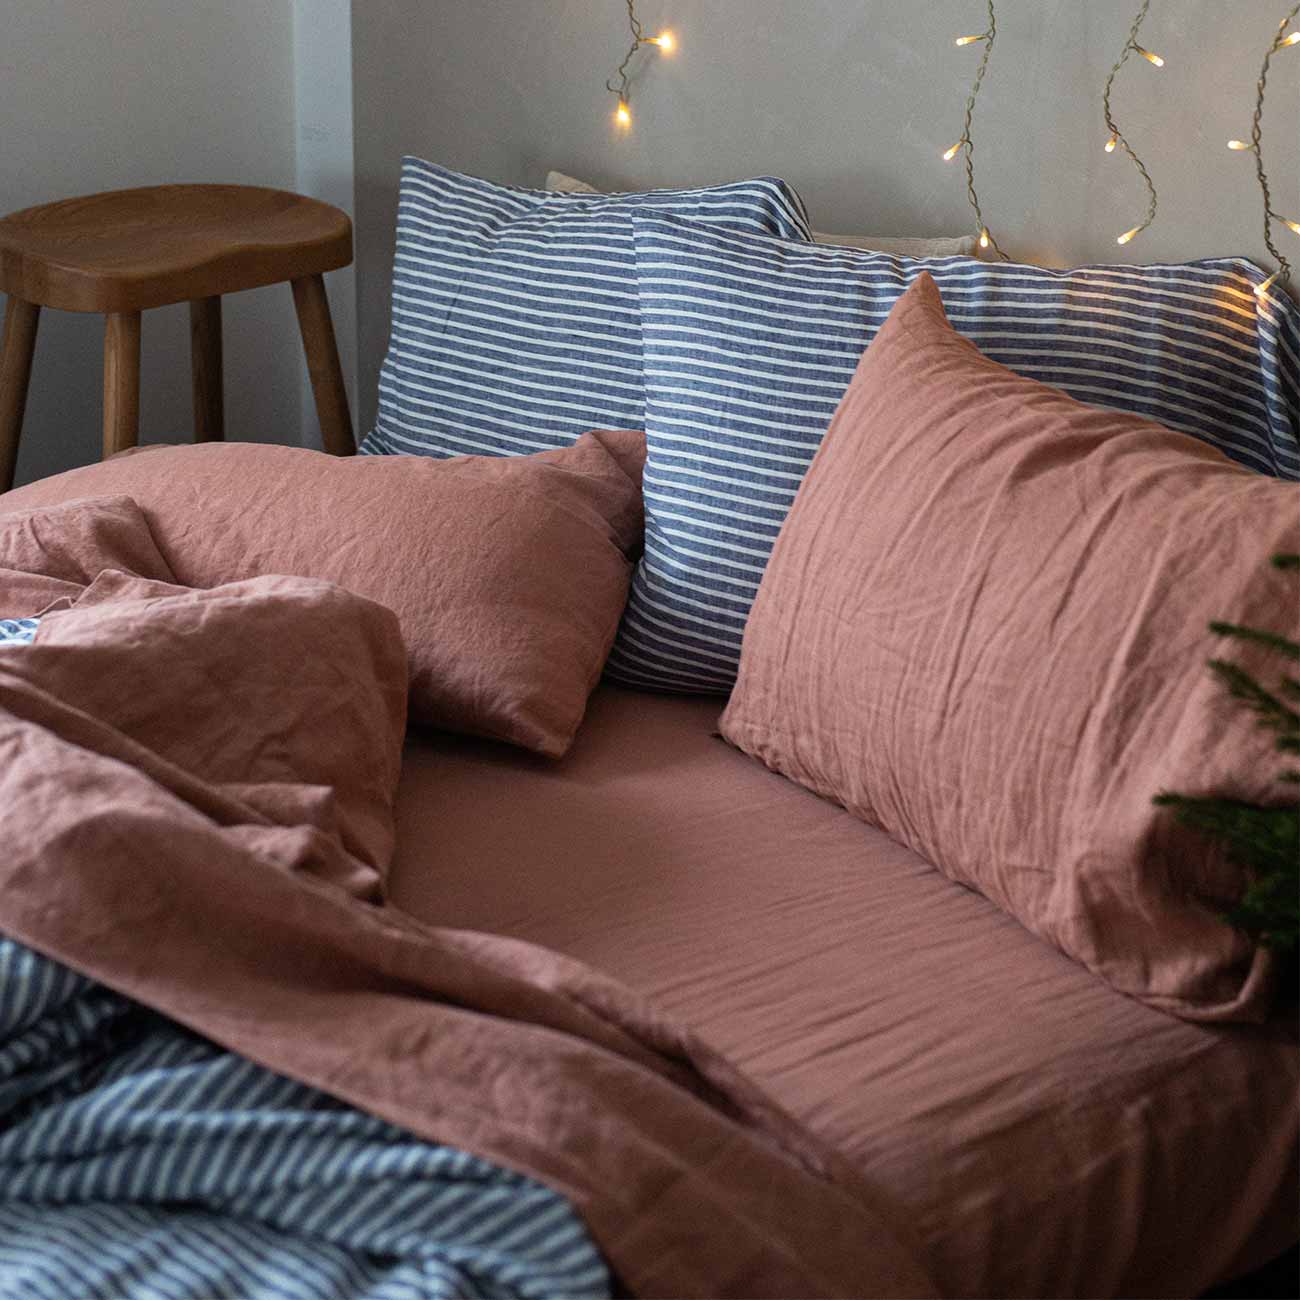 Midnight Stripe Linen Duvet Cover and Pillowcases with Warm Clay Sheets